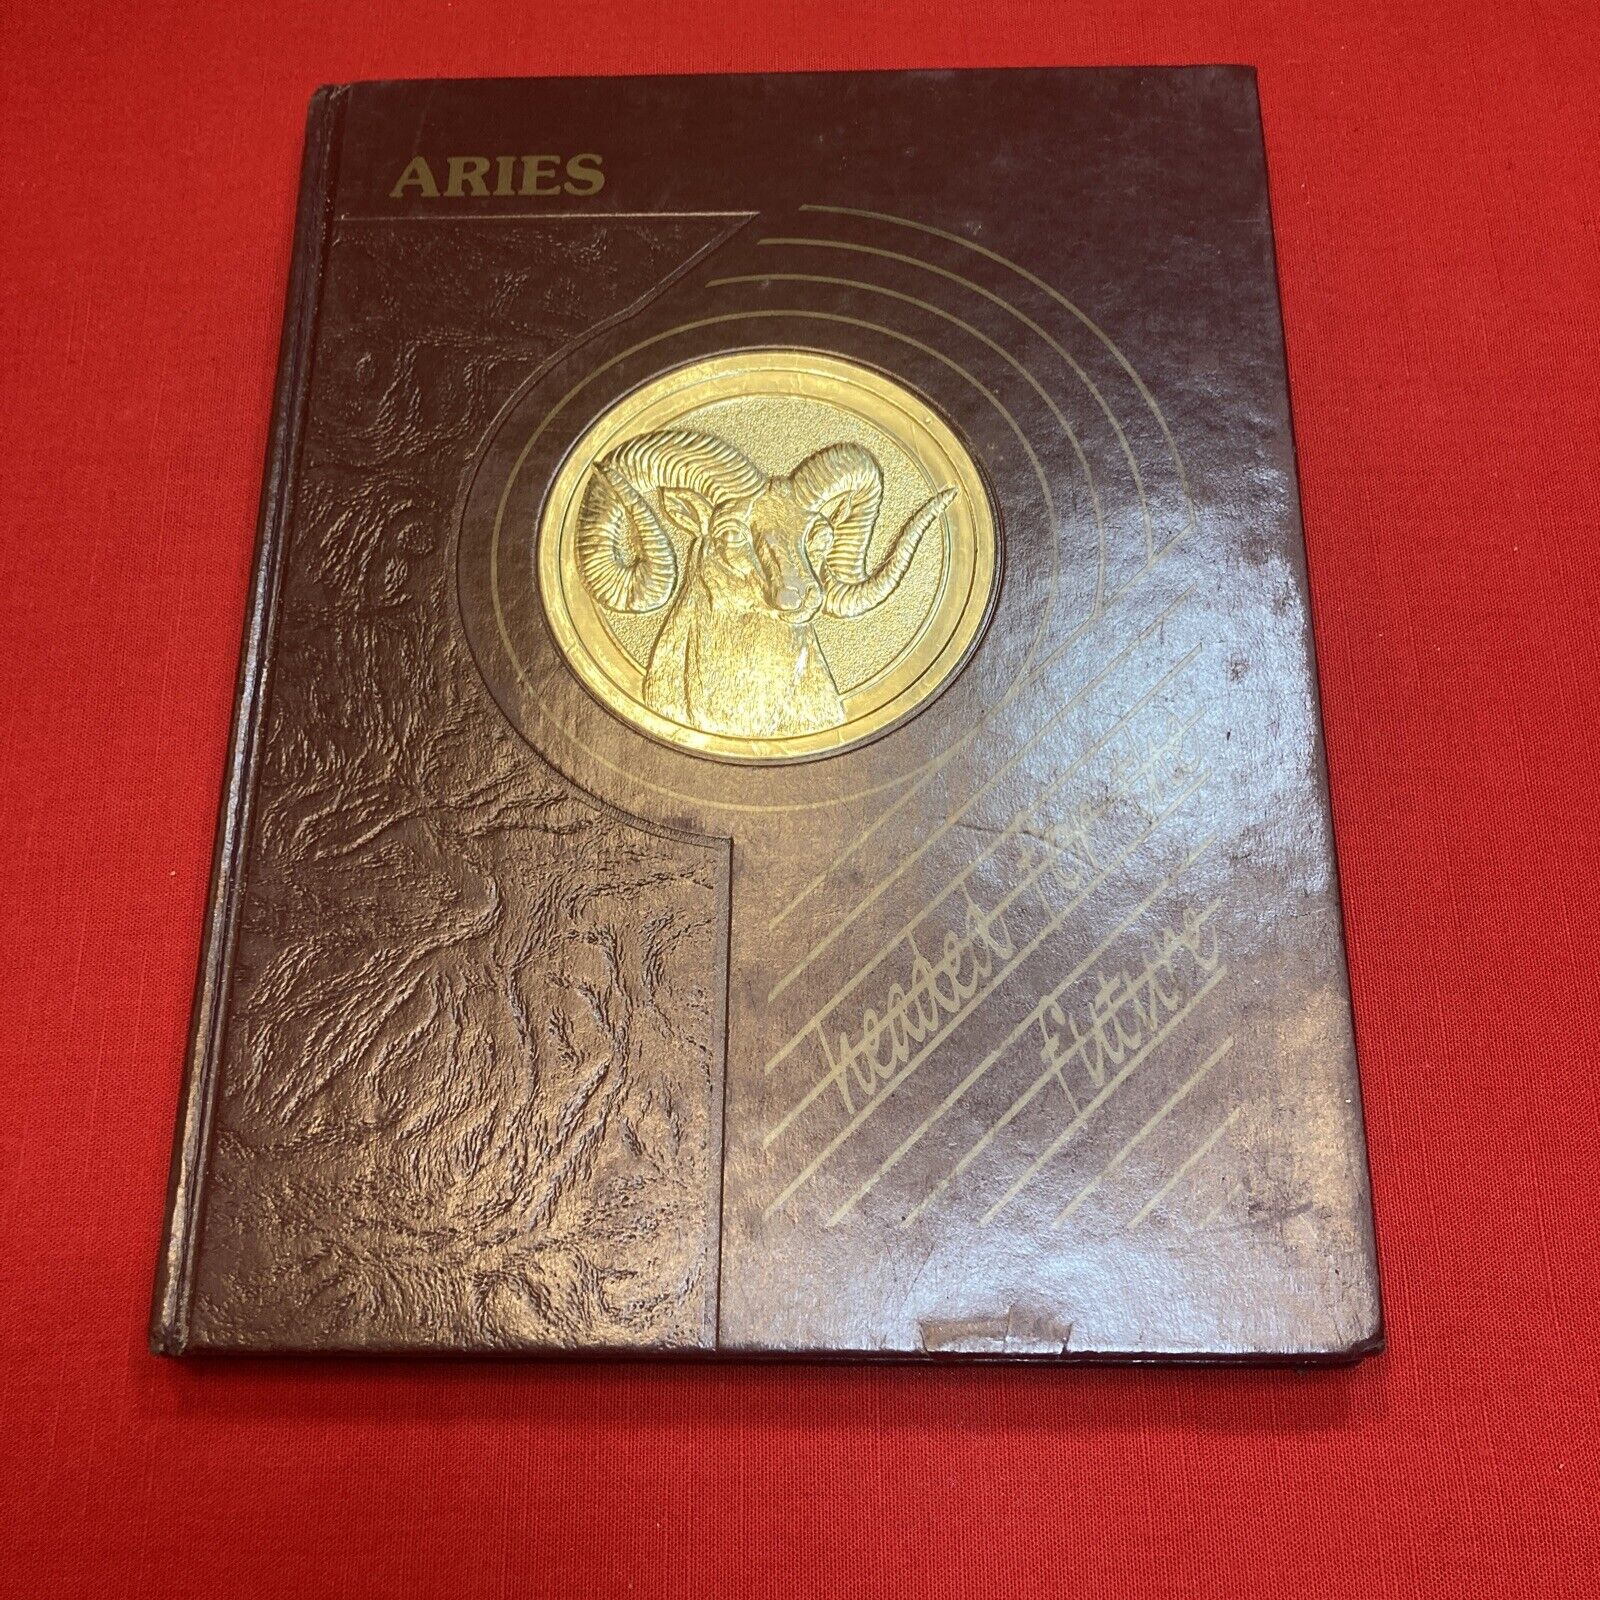 1987 Gloucester Catholic New Jersey yearbook. “Aries”  Gloucester New Jersey